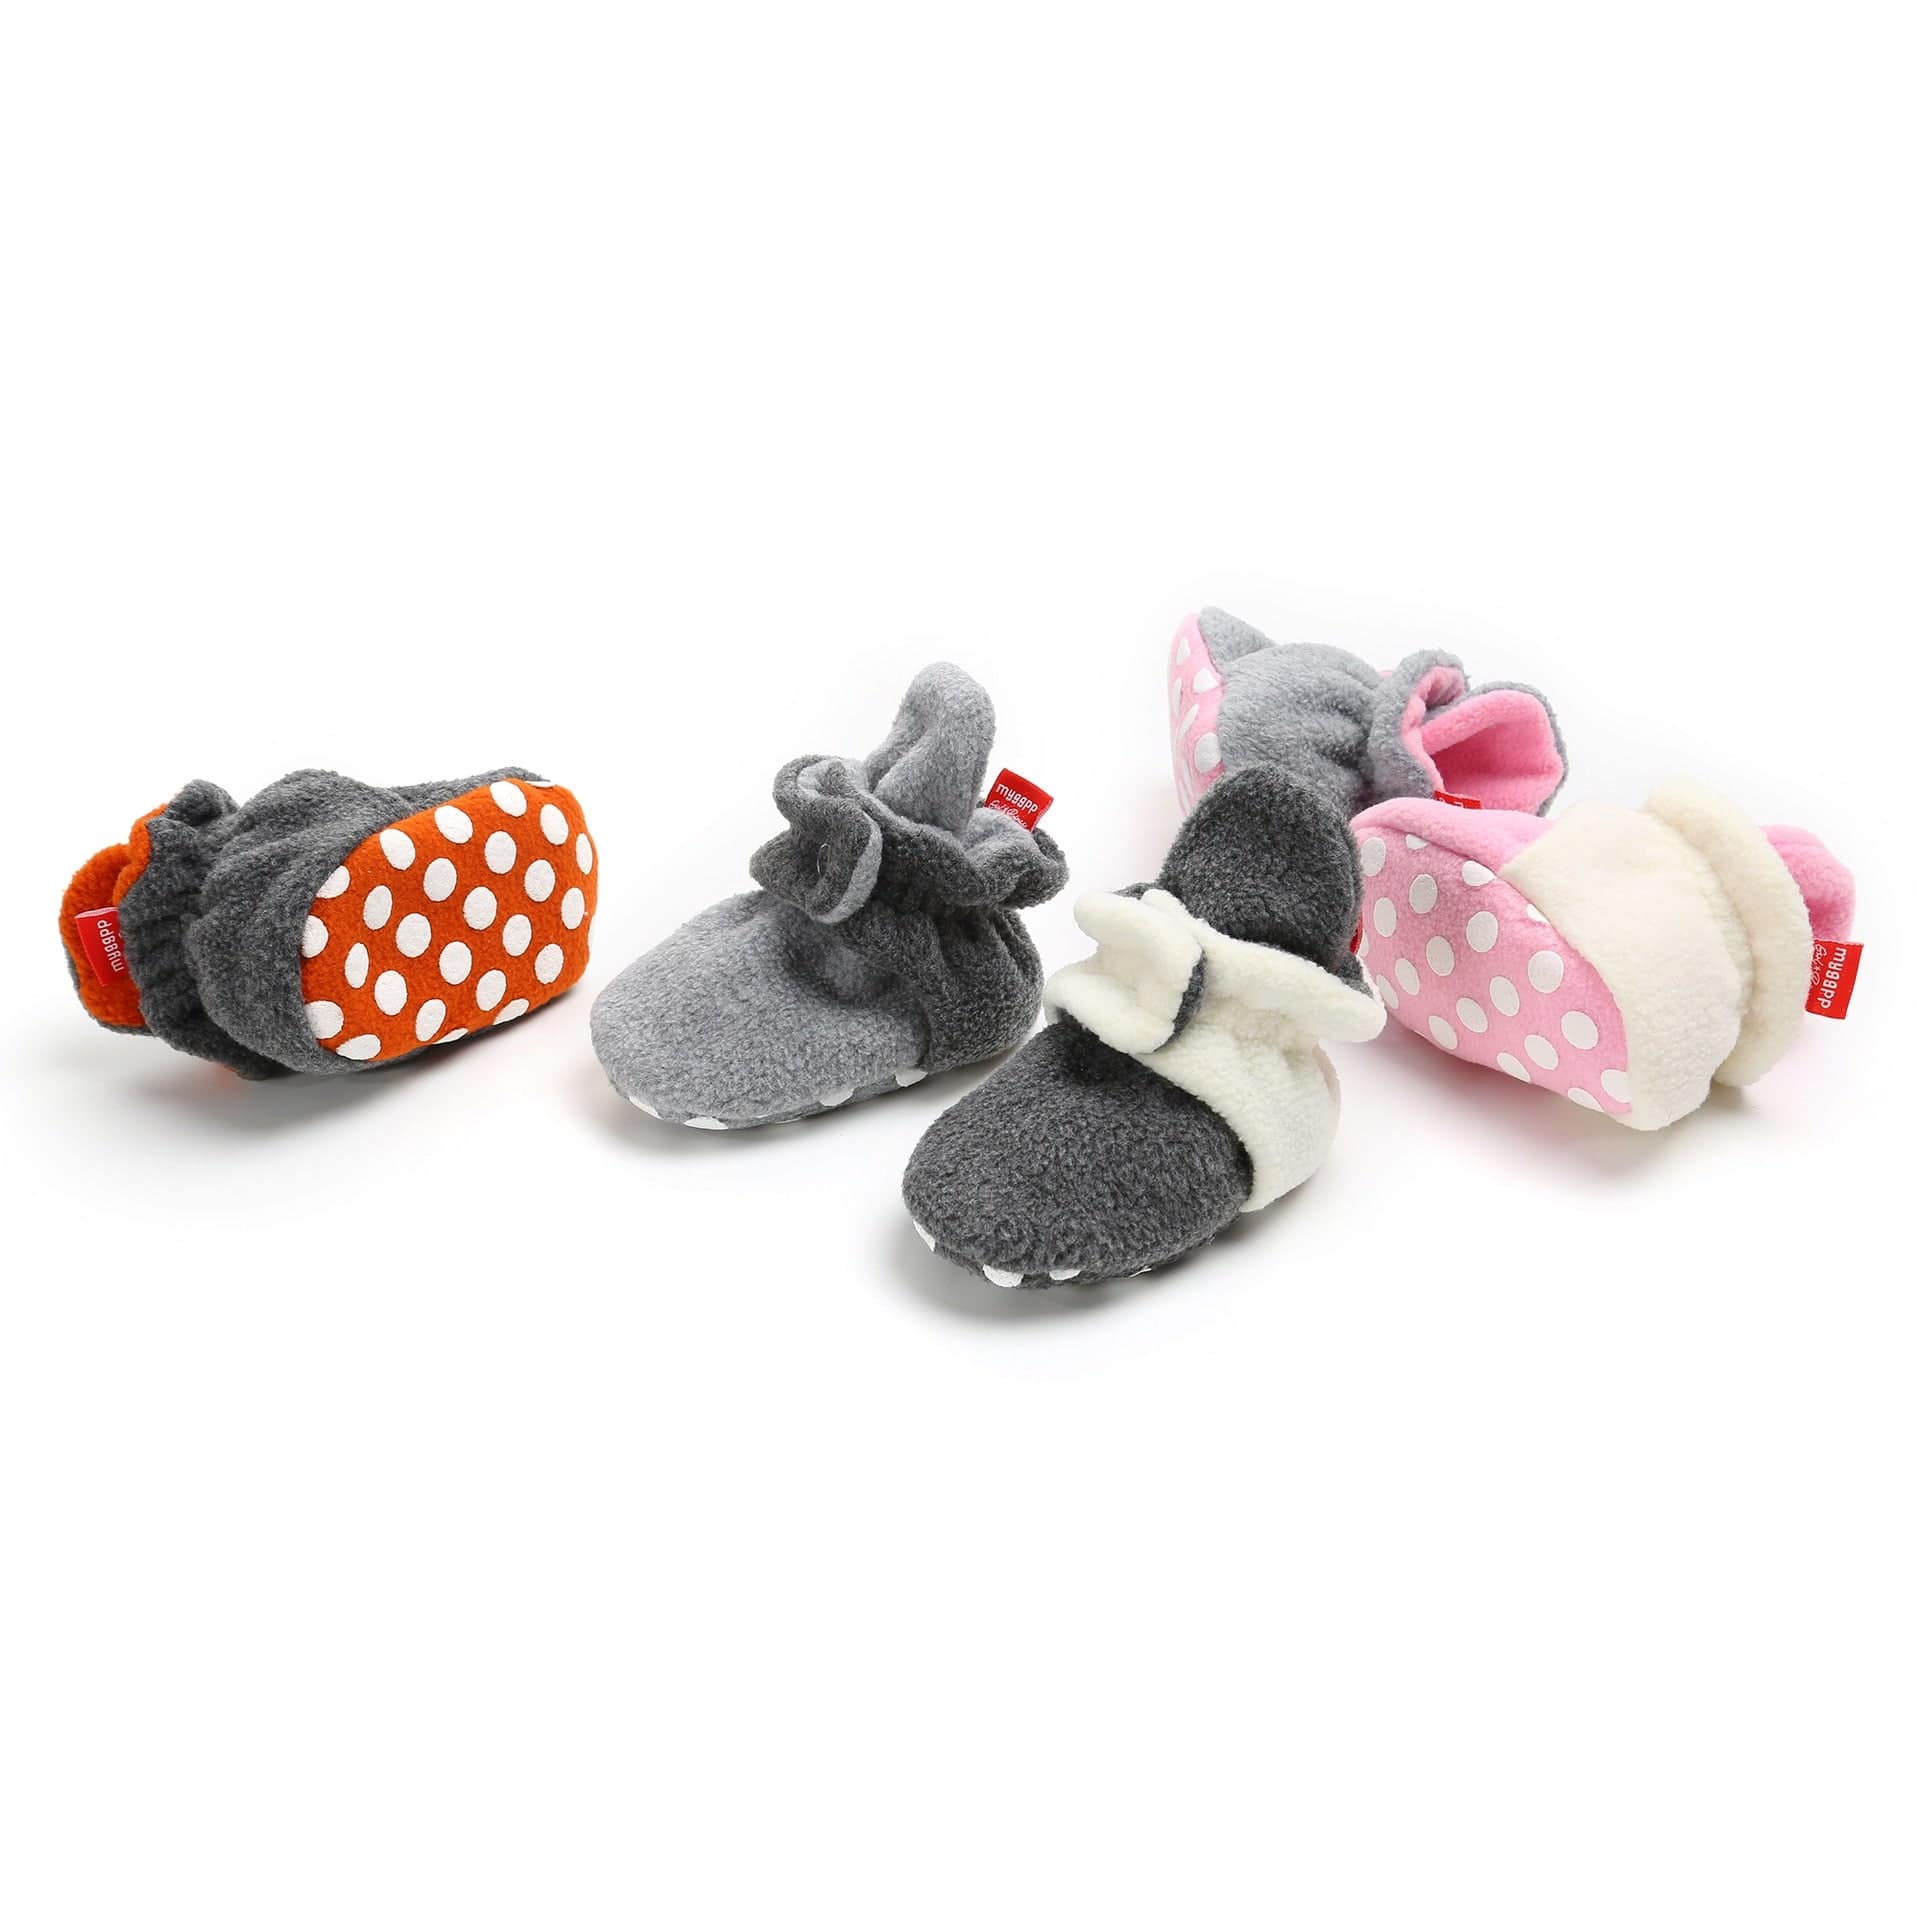 Proactive Baby Baby Shoes For Boy/Girl With Cute With Elegant Design I First Walkers Booties - Comfortable, Soft, Anti-Slip Warm Infant Shoes